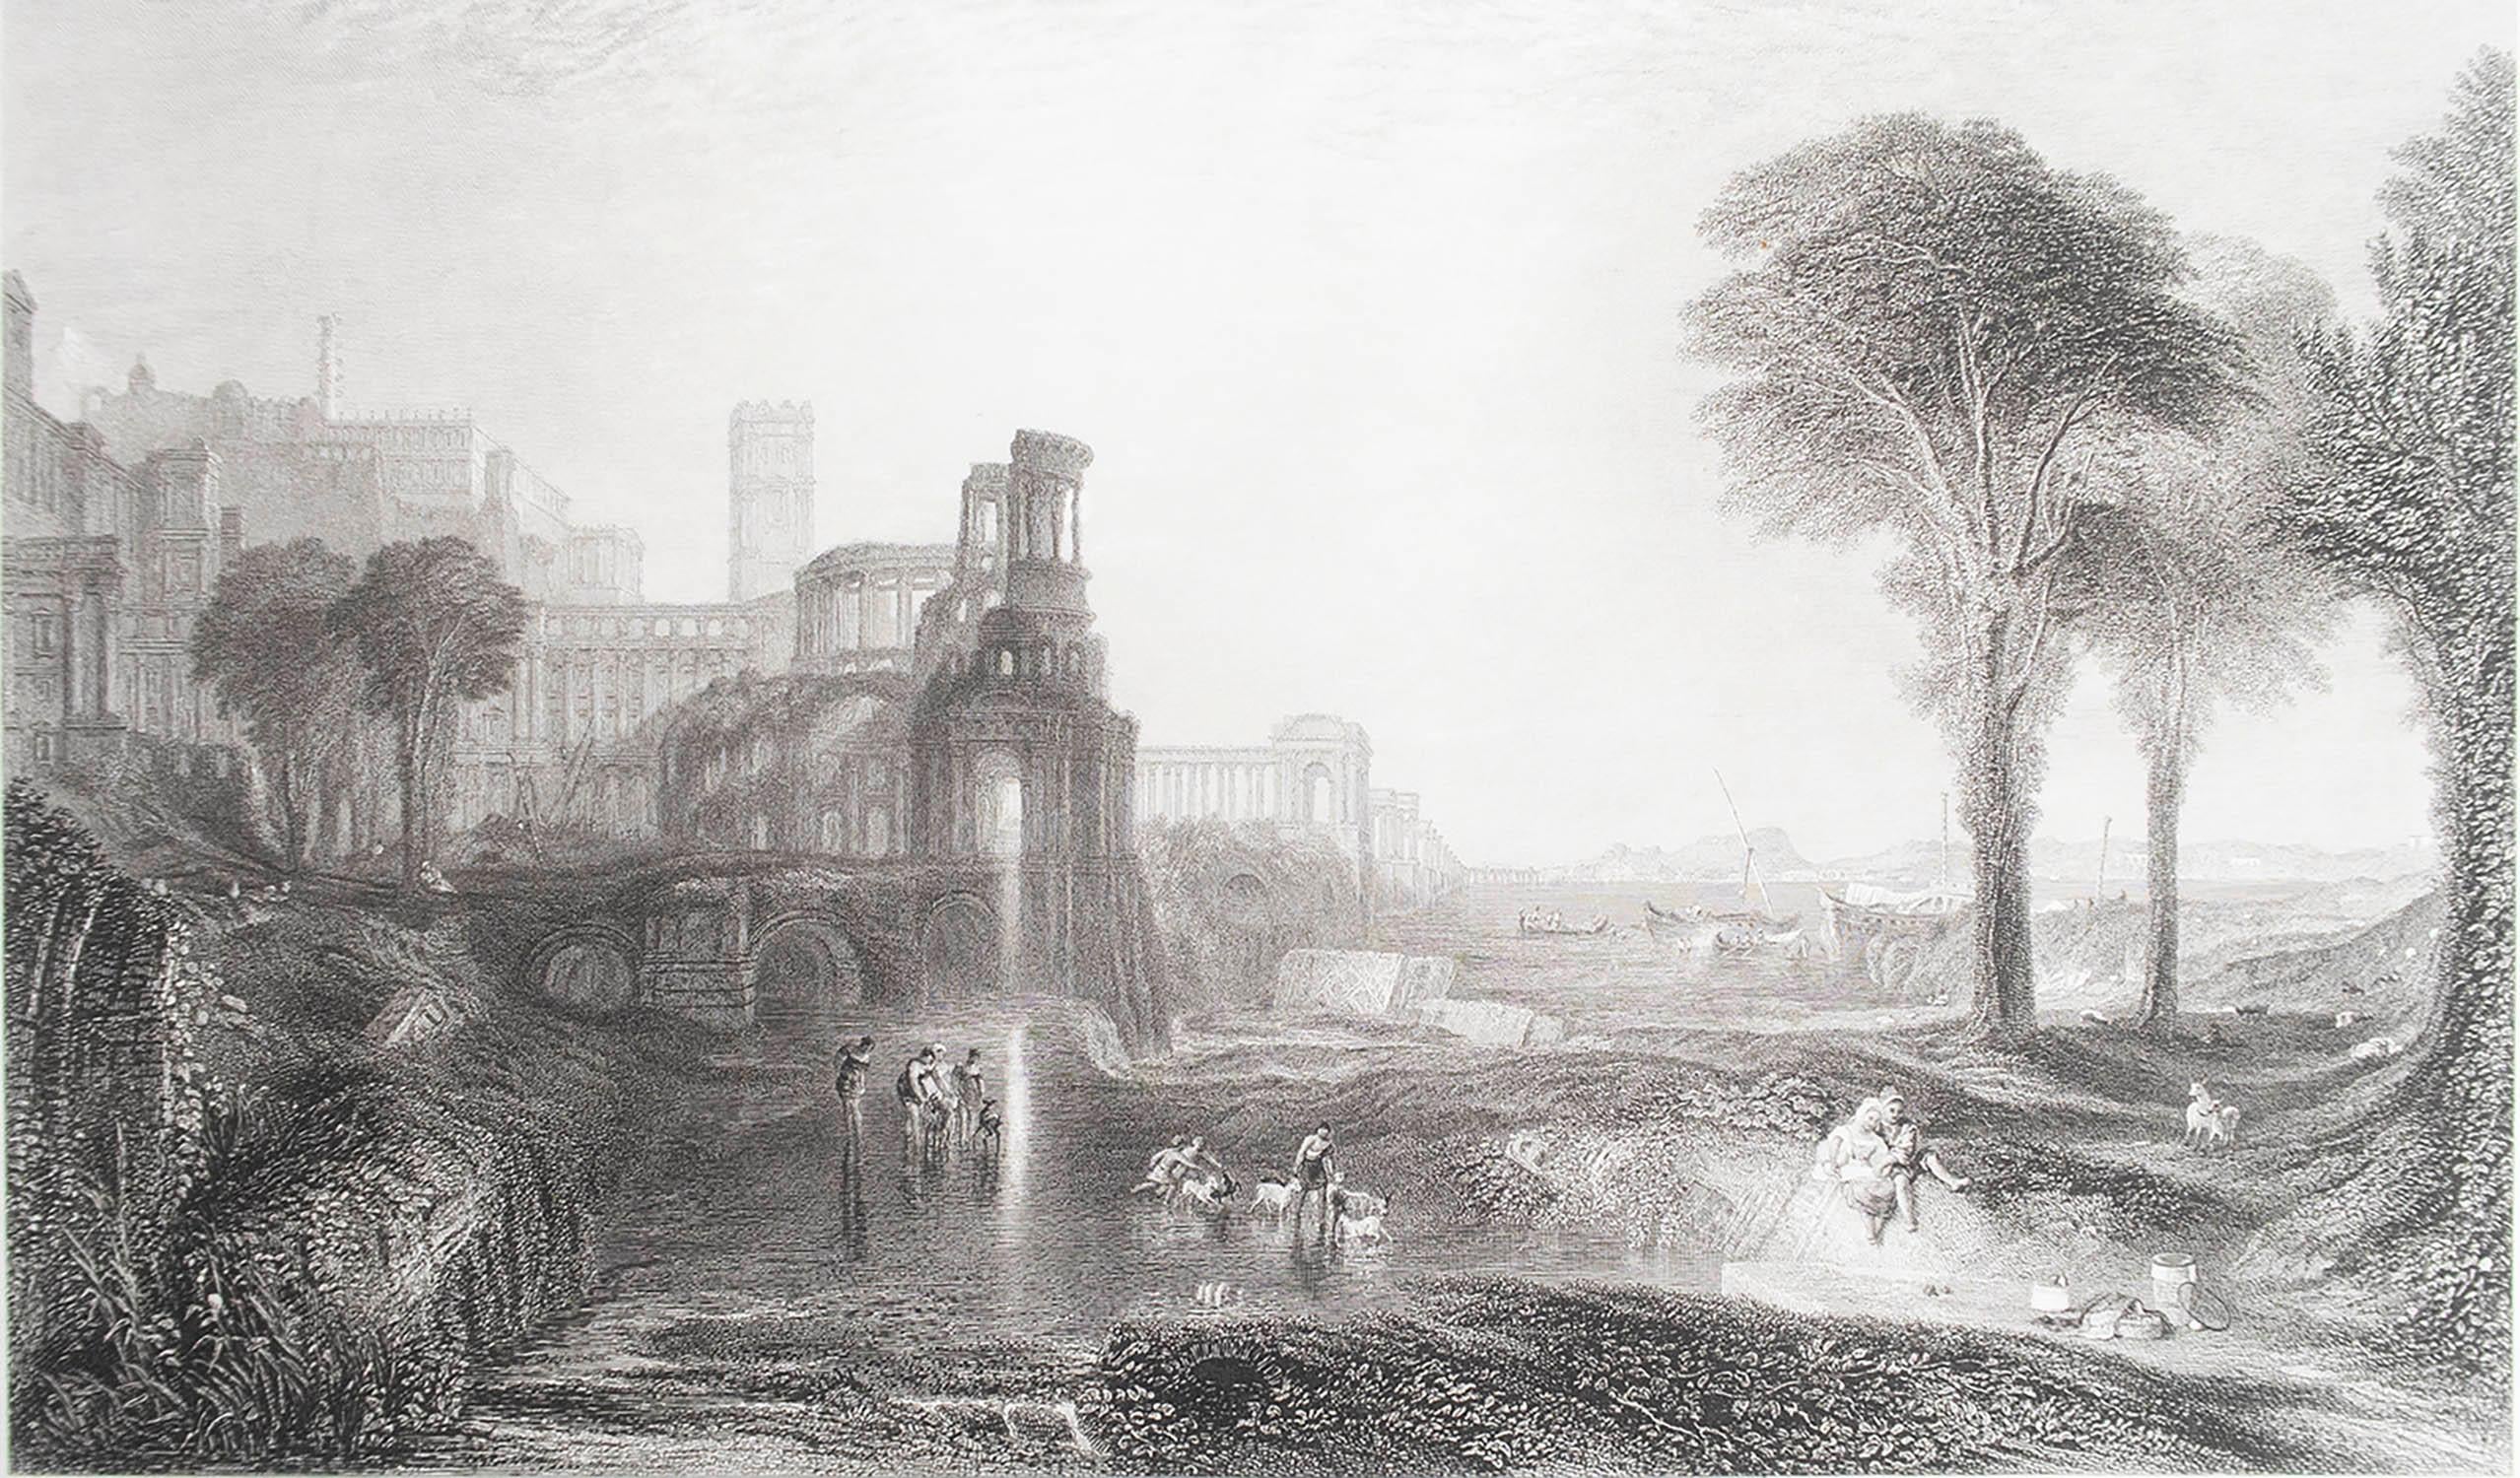 Great image after J.M.W Turner

Fine steel engraving 

Published by Virtue, C.1850

Unframed.

Free shipping